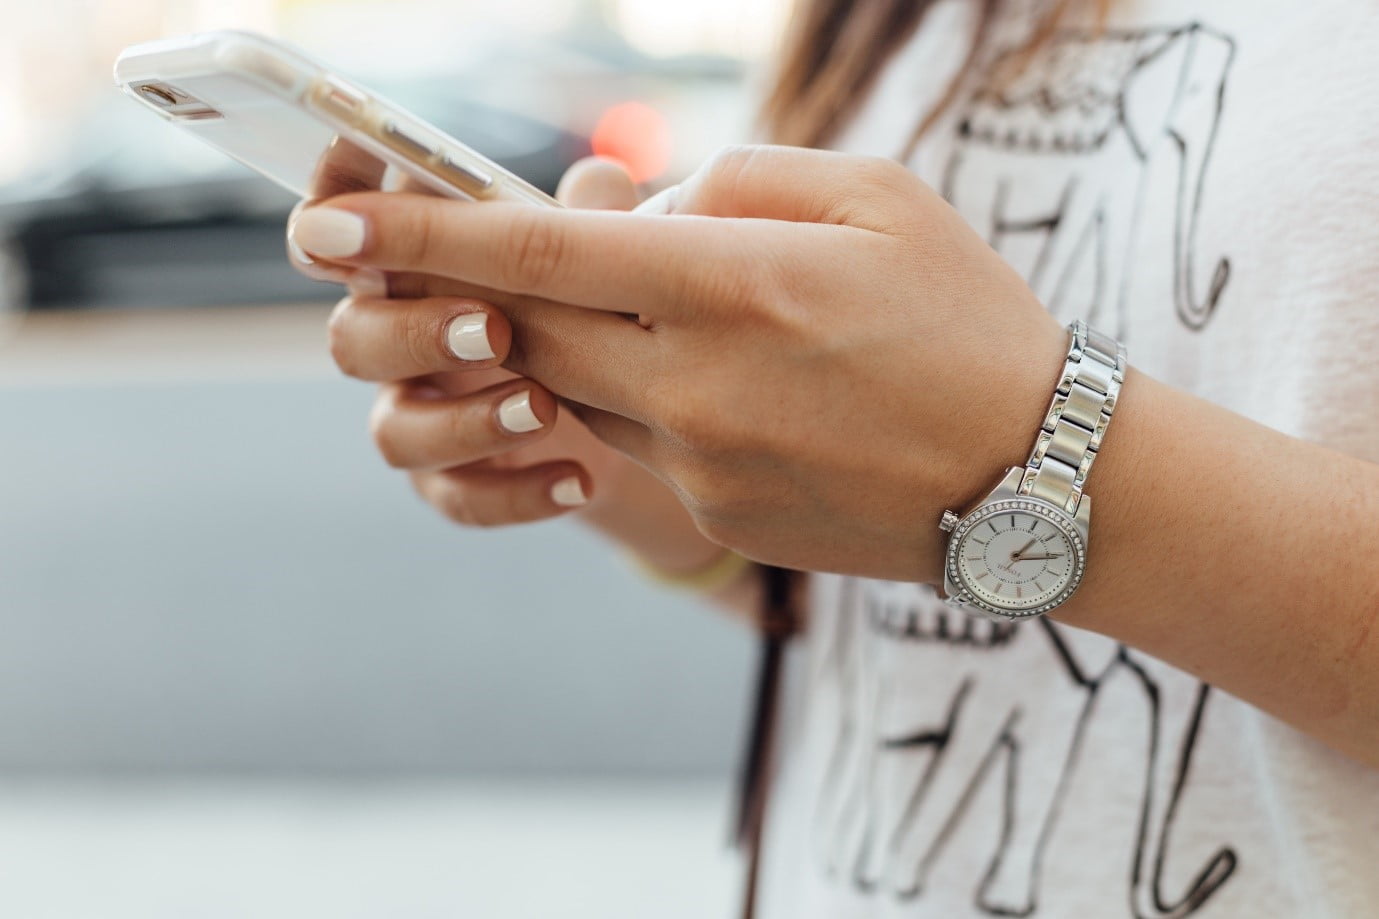 5 Pro tips for boosting user acquisition in fashion mobile apps